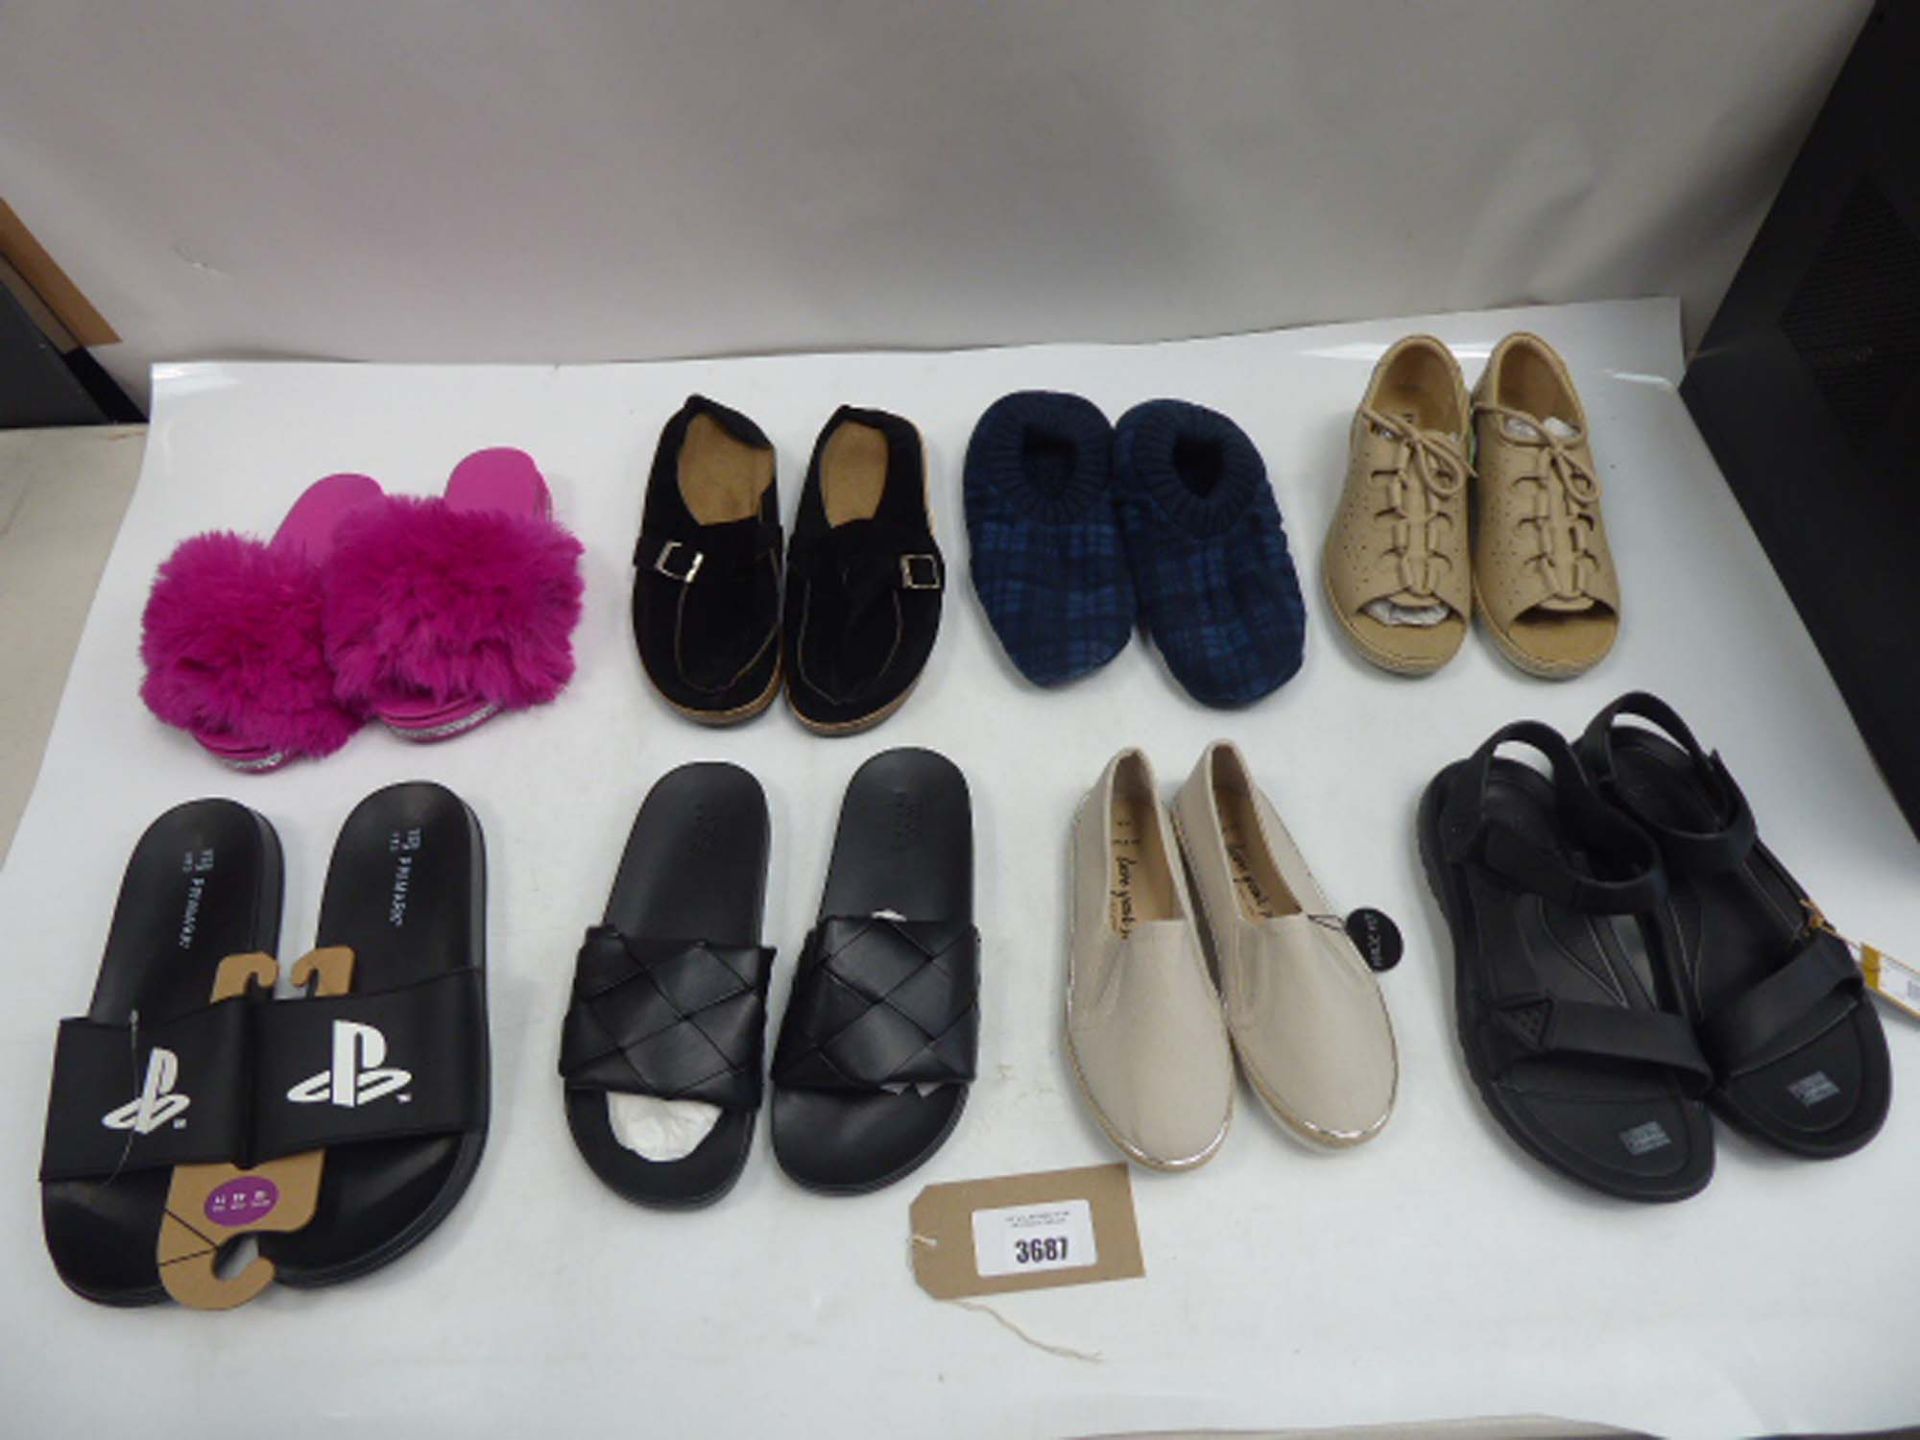 Bag of loose assorted sandals and slippers (approx 14 pairs)